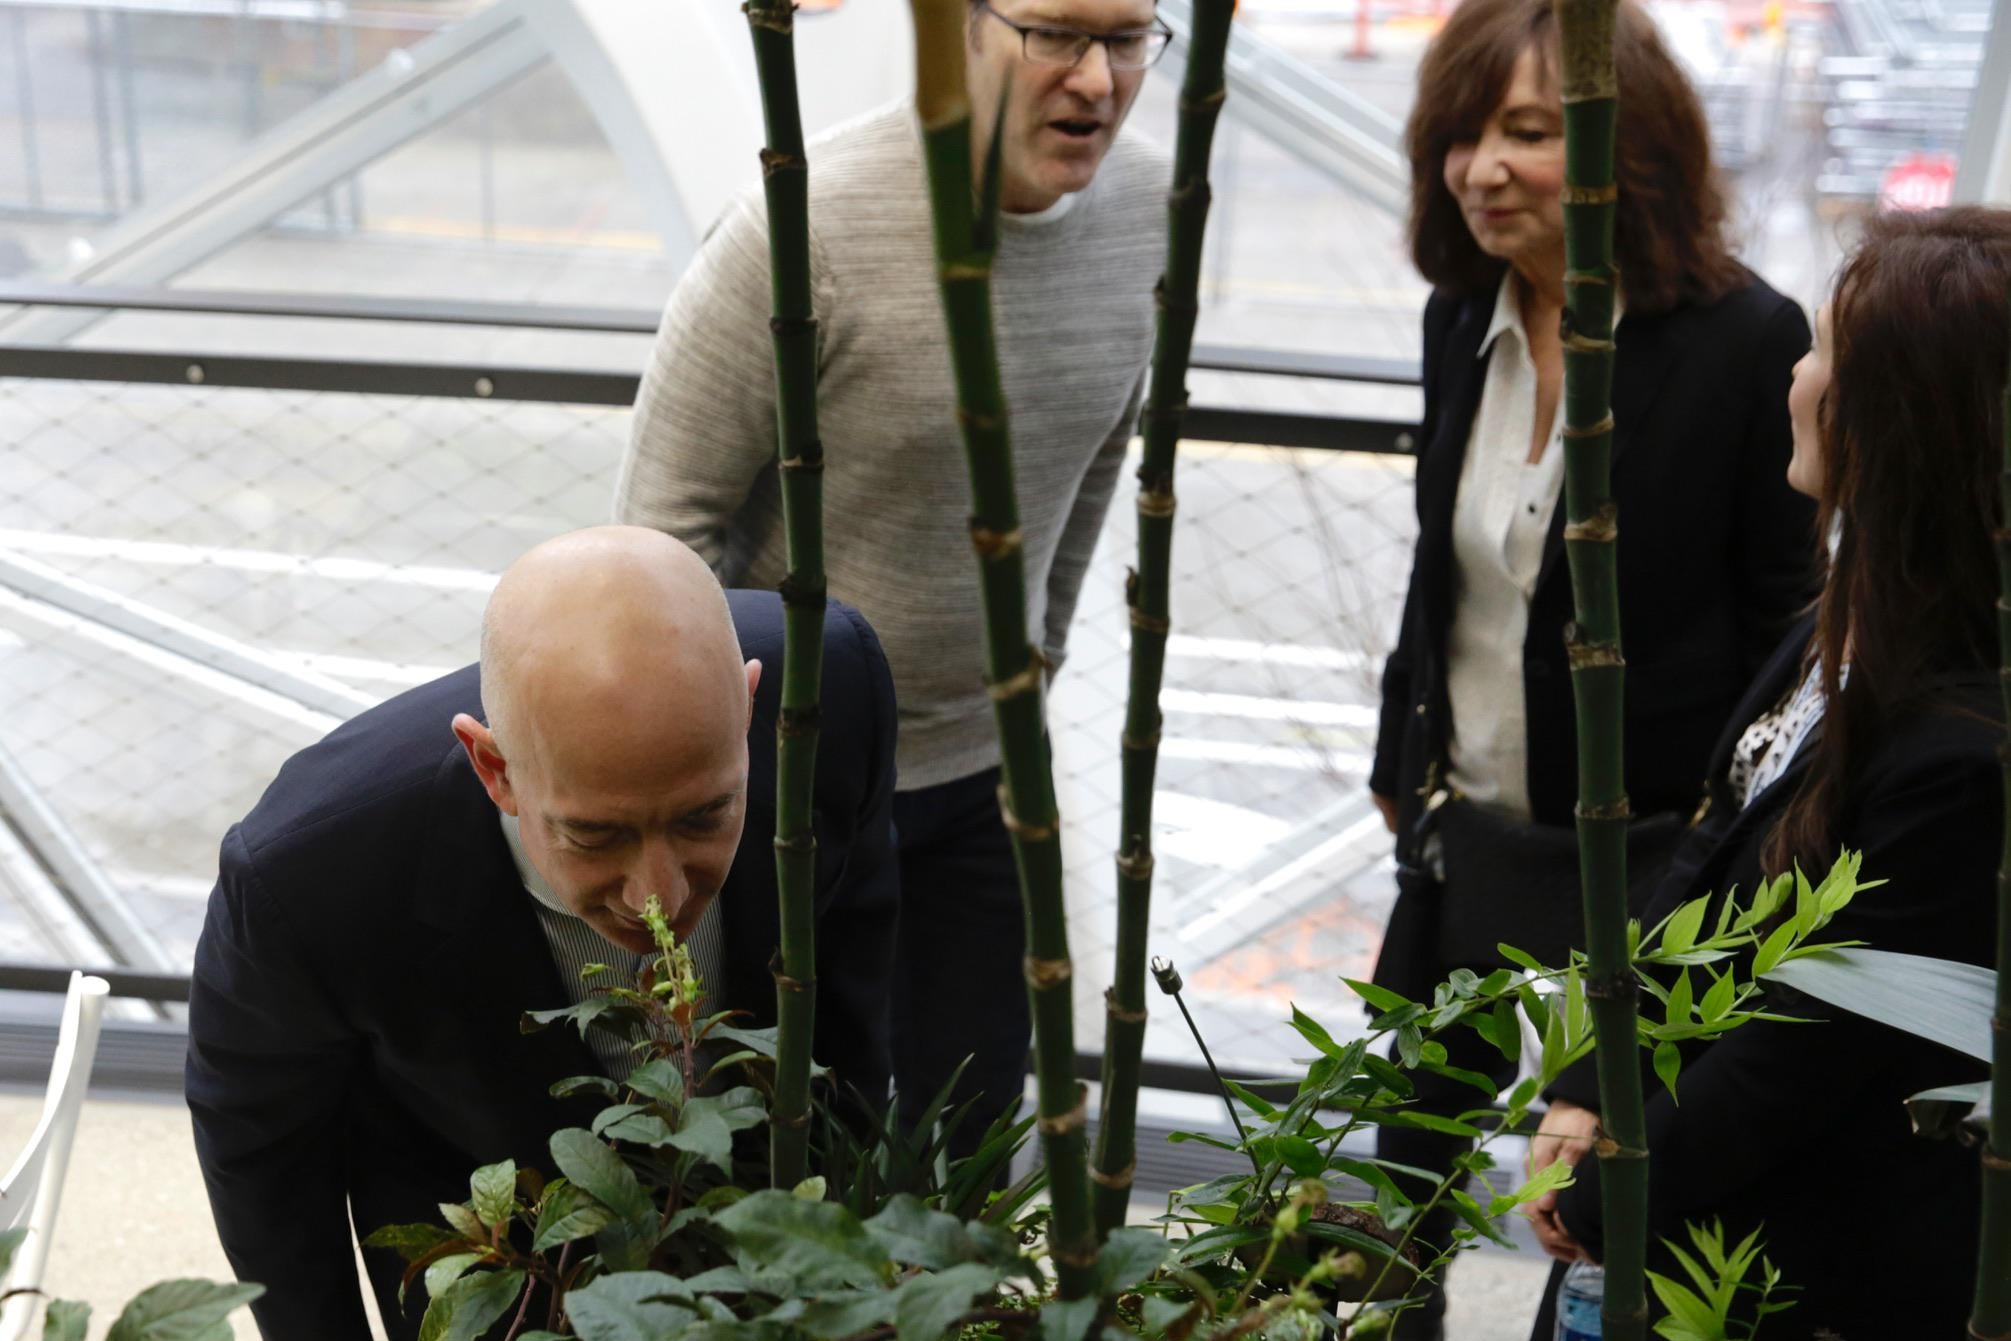 Chief Executive Officer of Amazon, Jeff Bezos, tours the facility at the grand opening of the Amazon Spheres, in Seattle, Washington on January 29, 2018. 
Amazon opened its new Seattle office space which looks more like a rainforest. The company created the Spheres Complex to help spark employee creativity.  / AFP PHOTO / JASON REDMOND        (Photo credit should read JASON REDMOND/AFP/Getty Images)